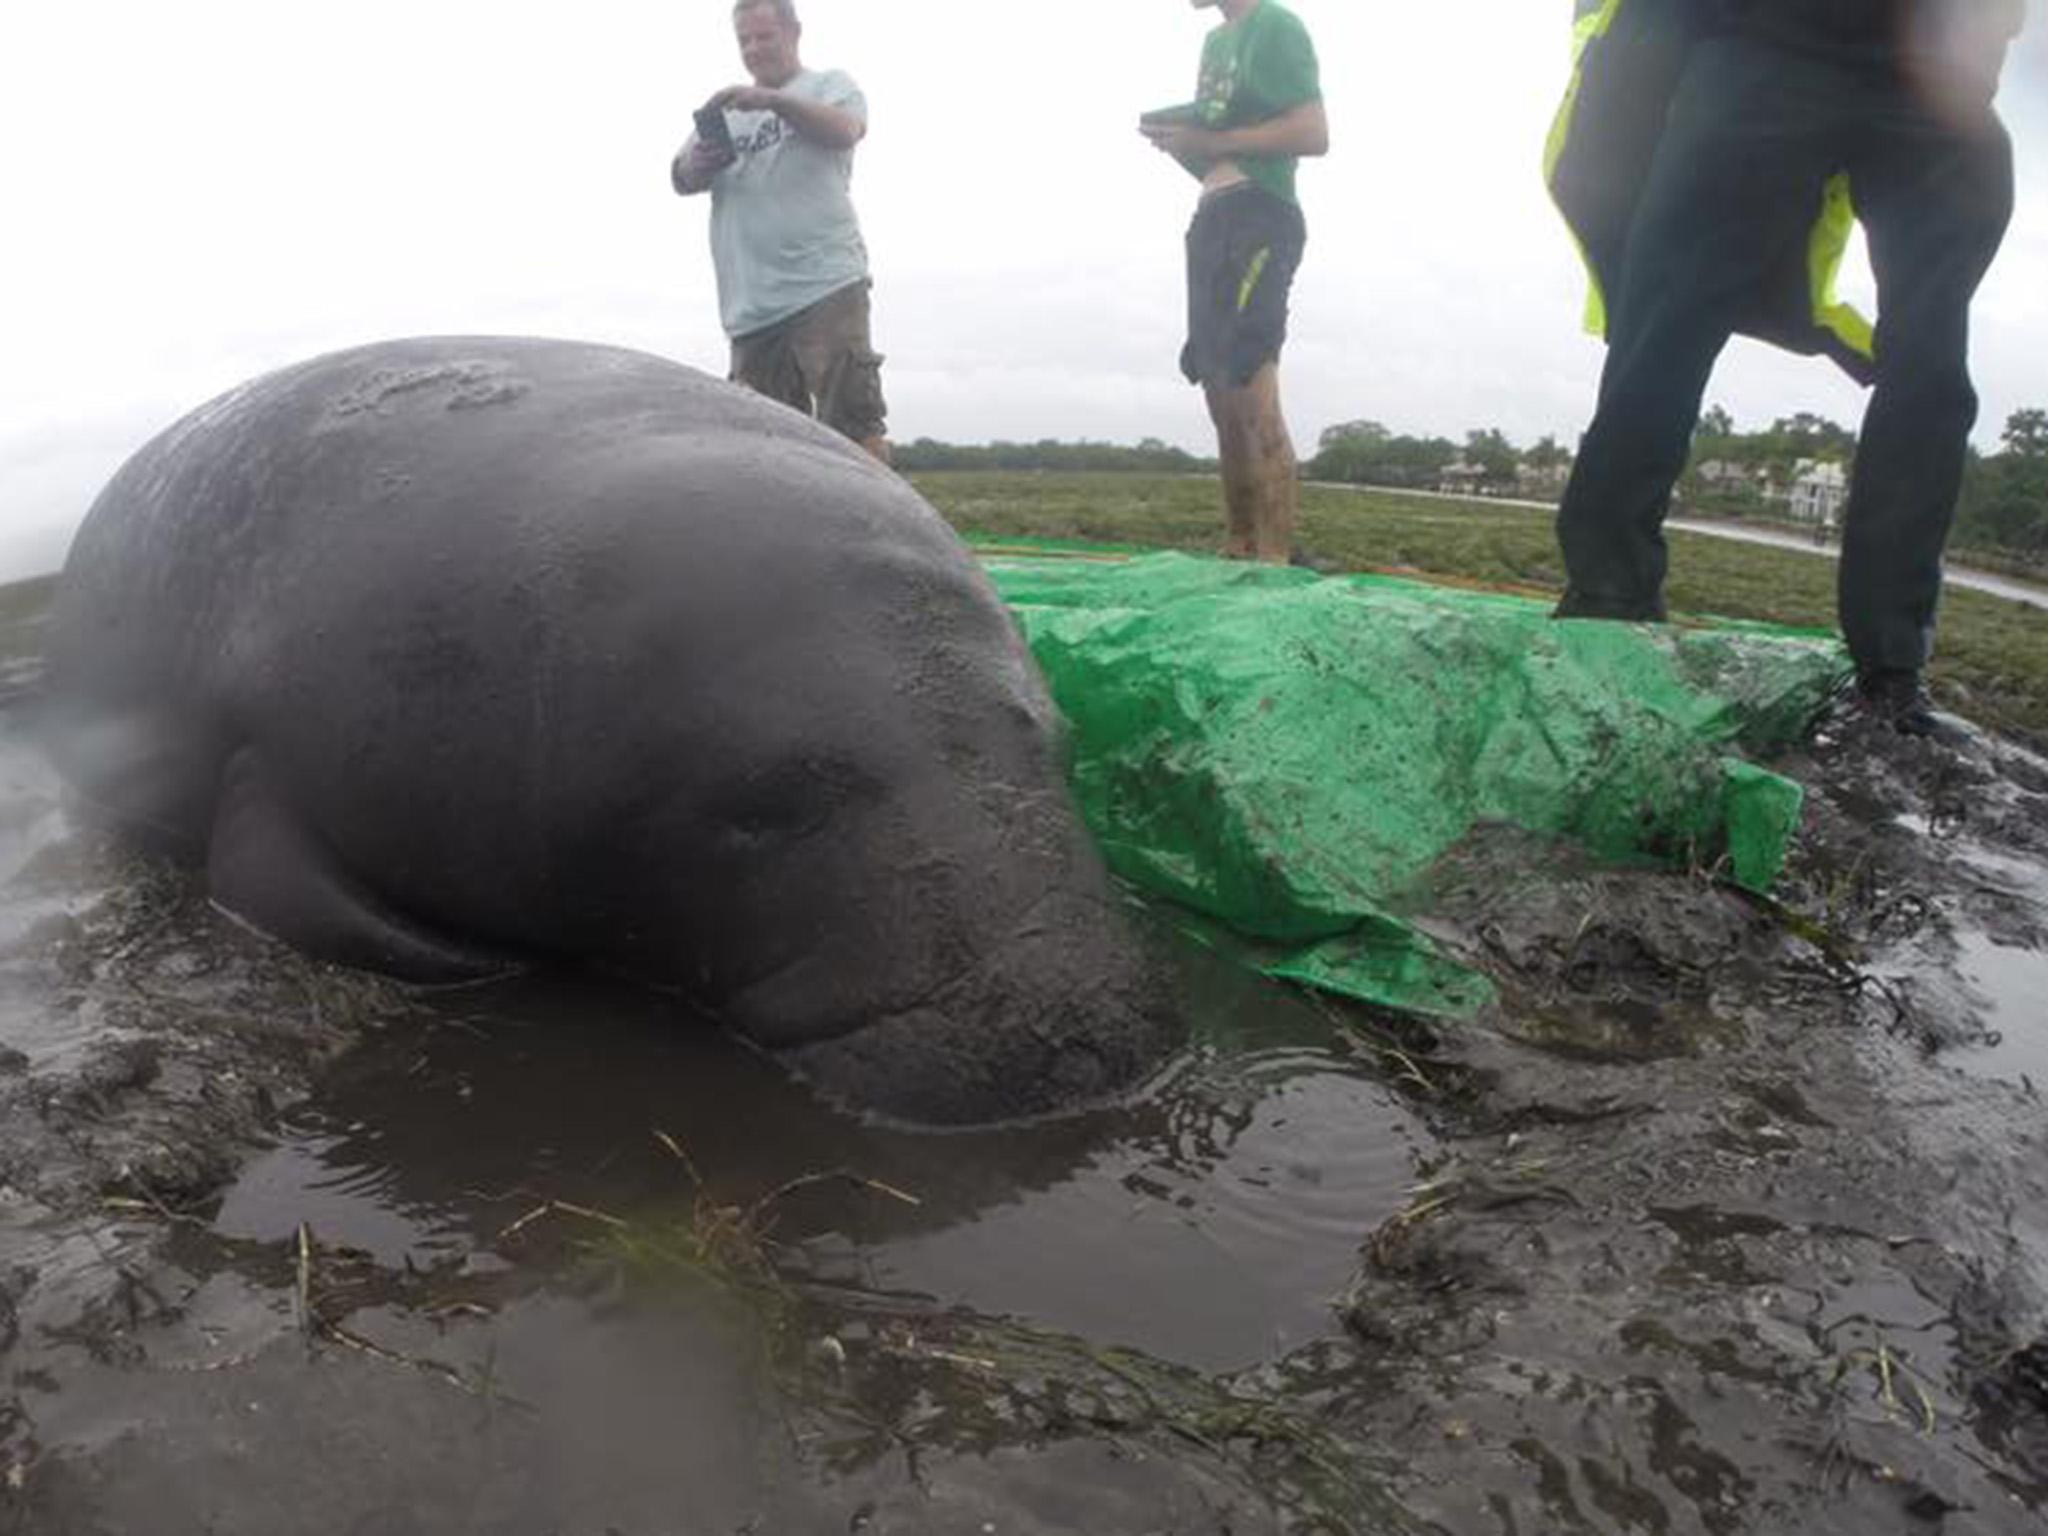 One of the beached manatees lies stranded